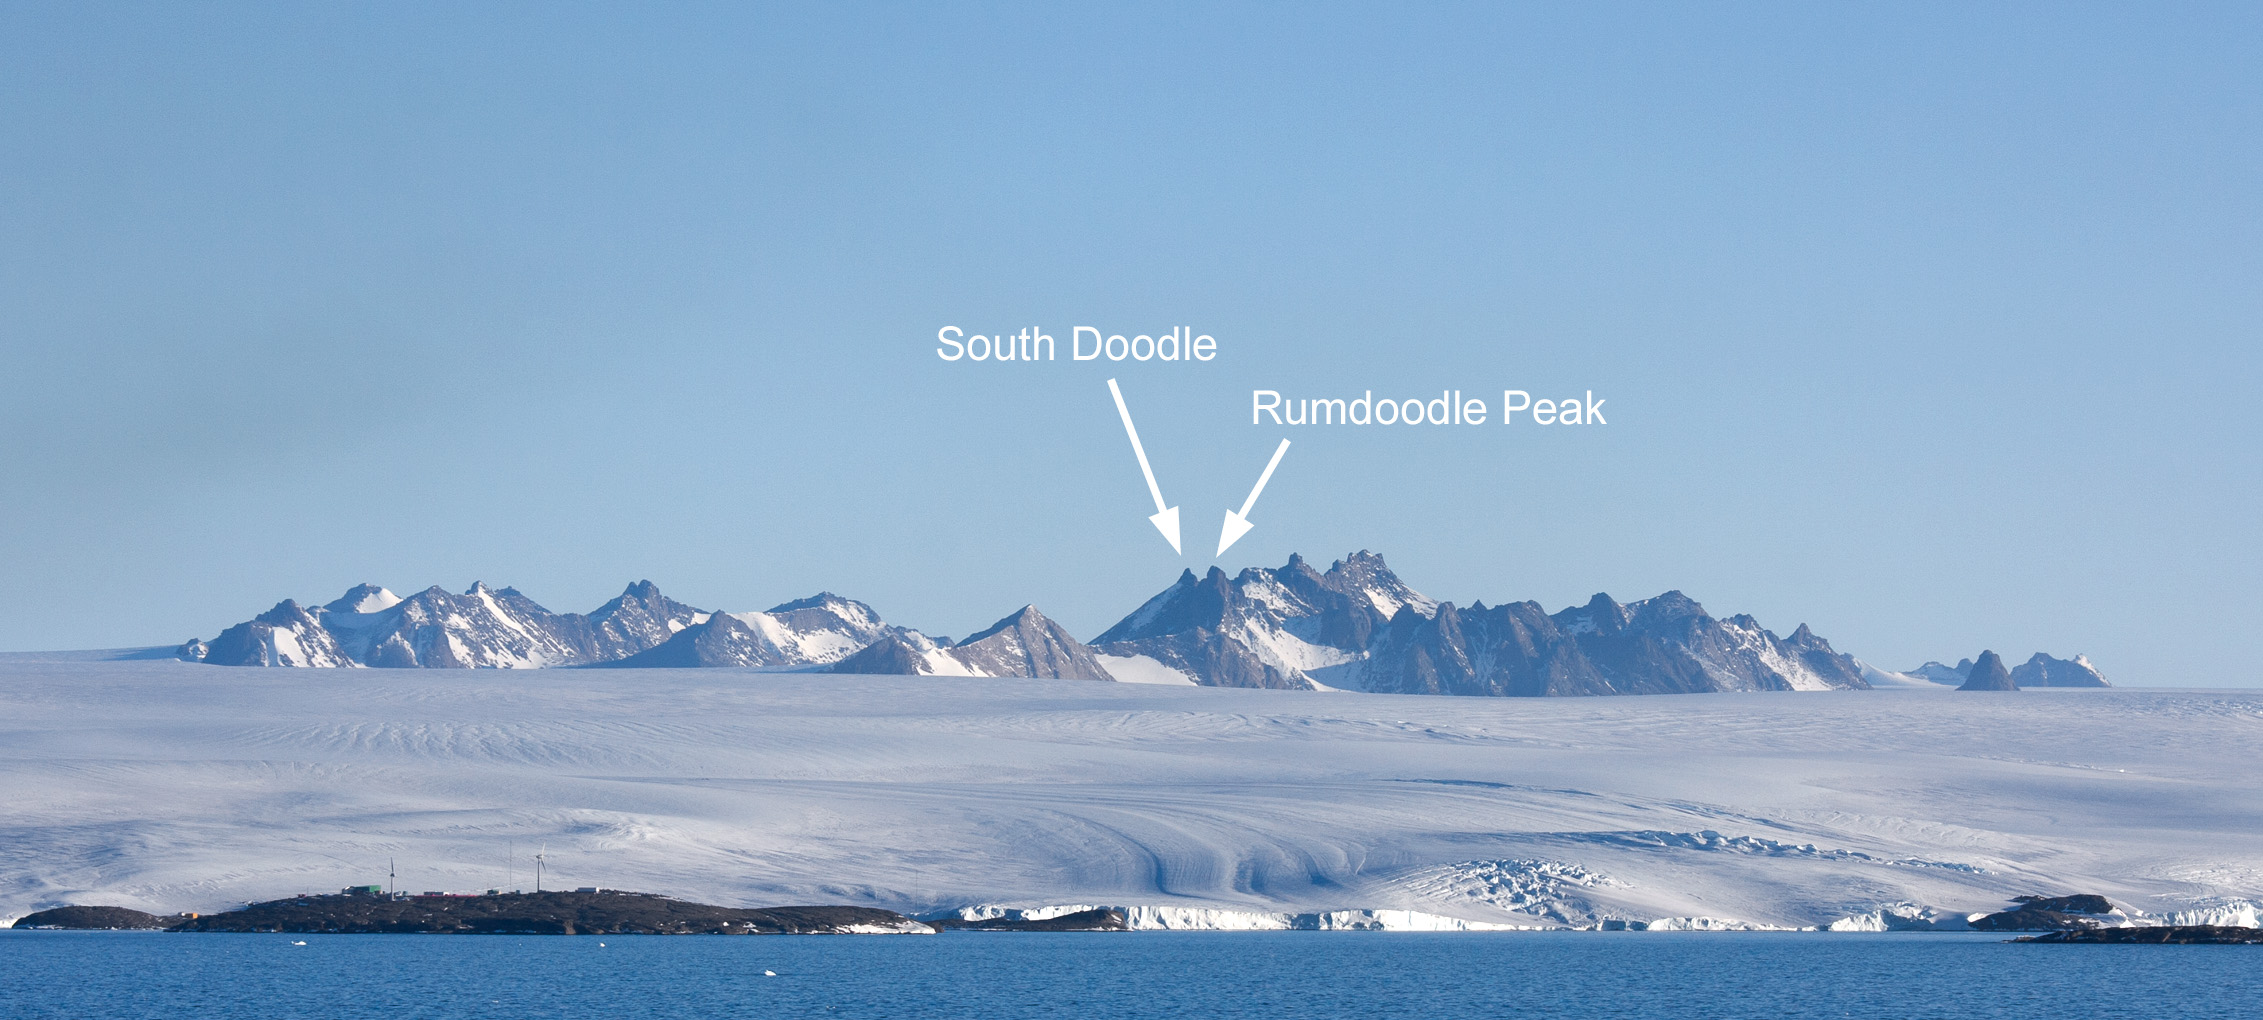 The North Masson range viewed from offshore, with Mawson Station visible in the foreground. By Bignoter CC BY-SA 3.0.